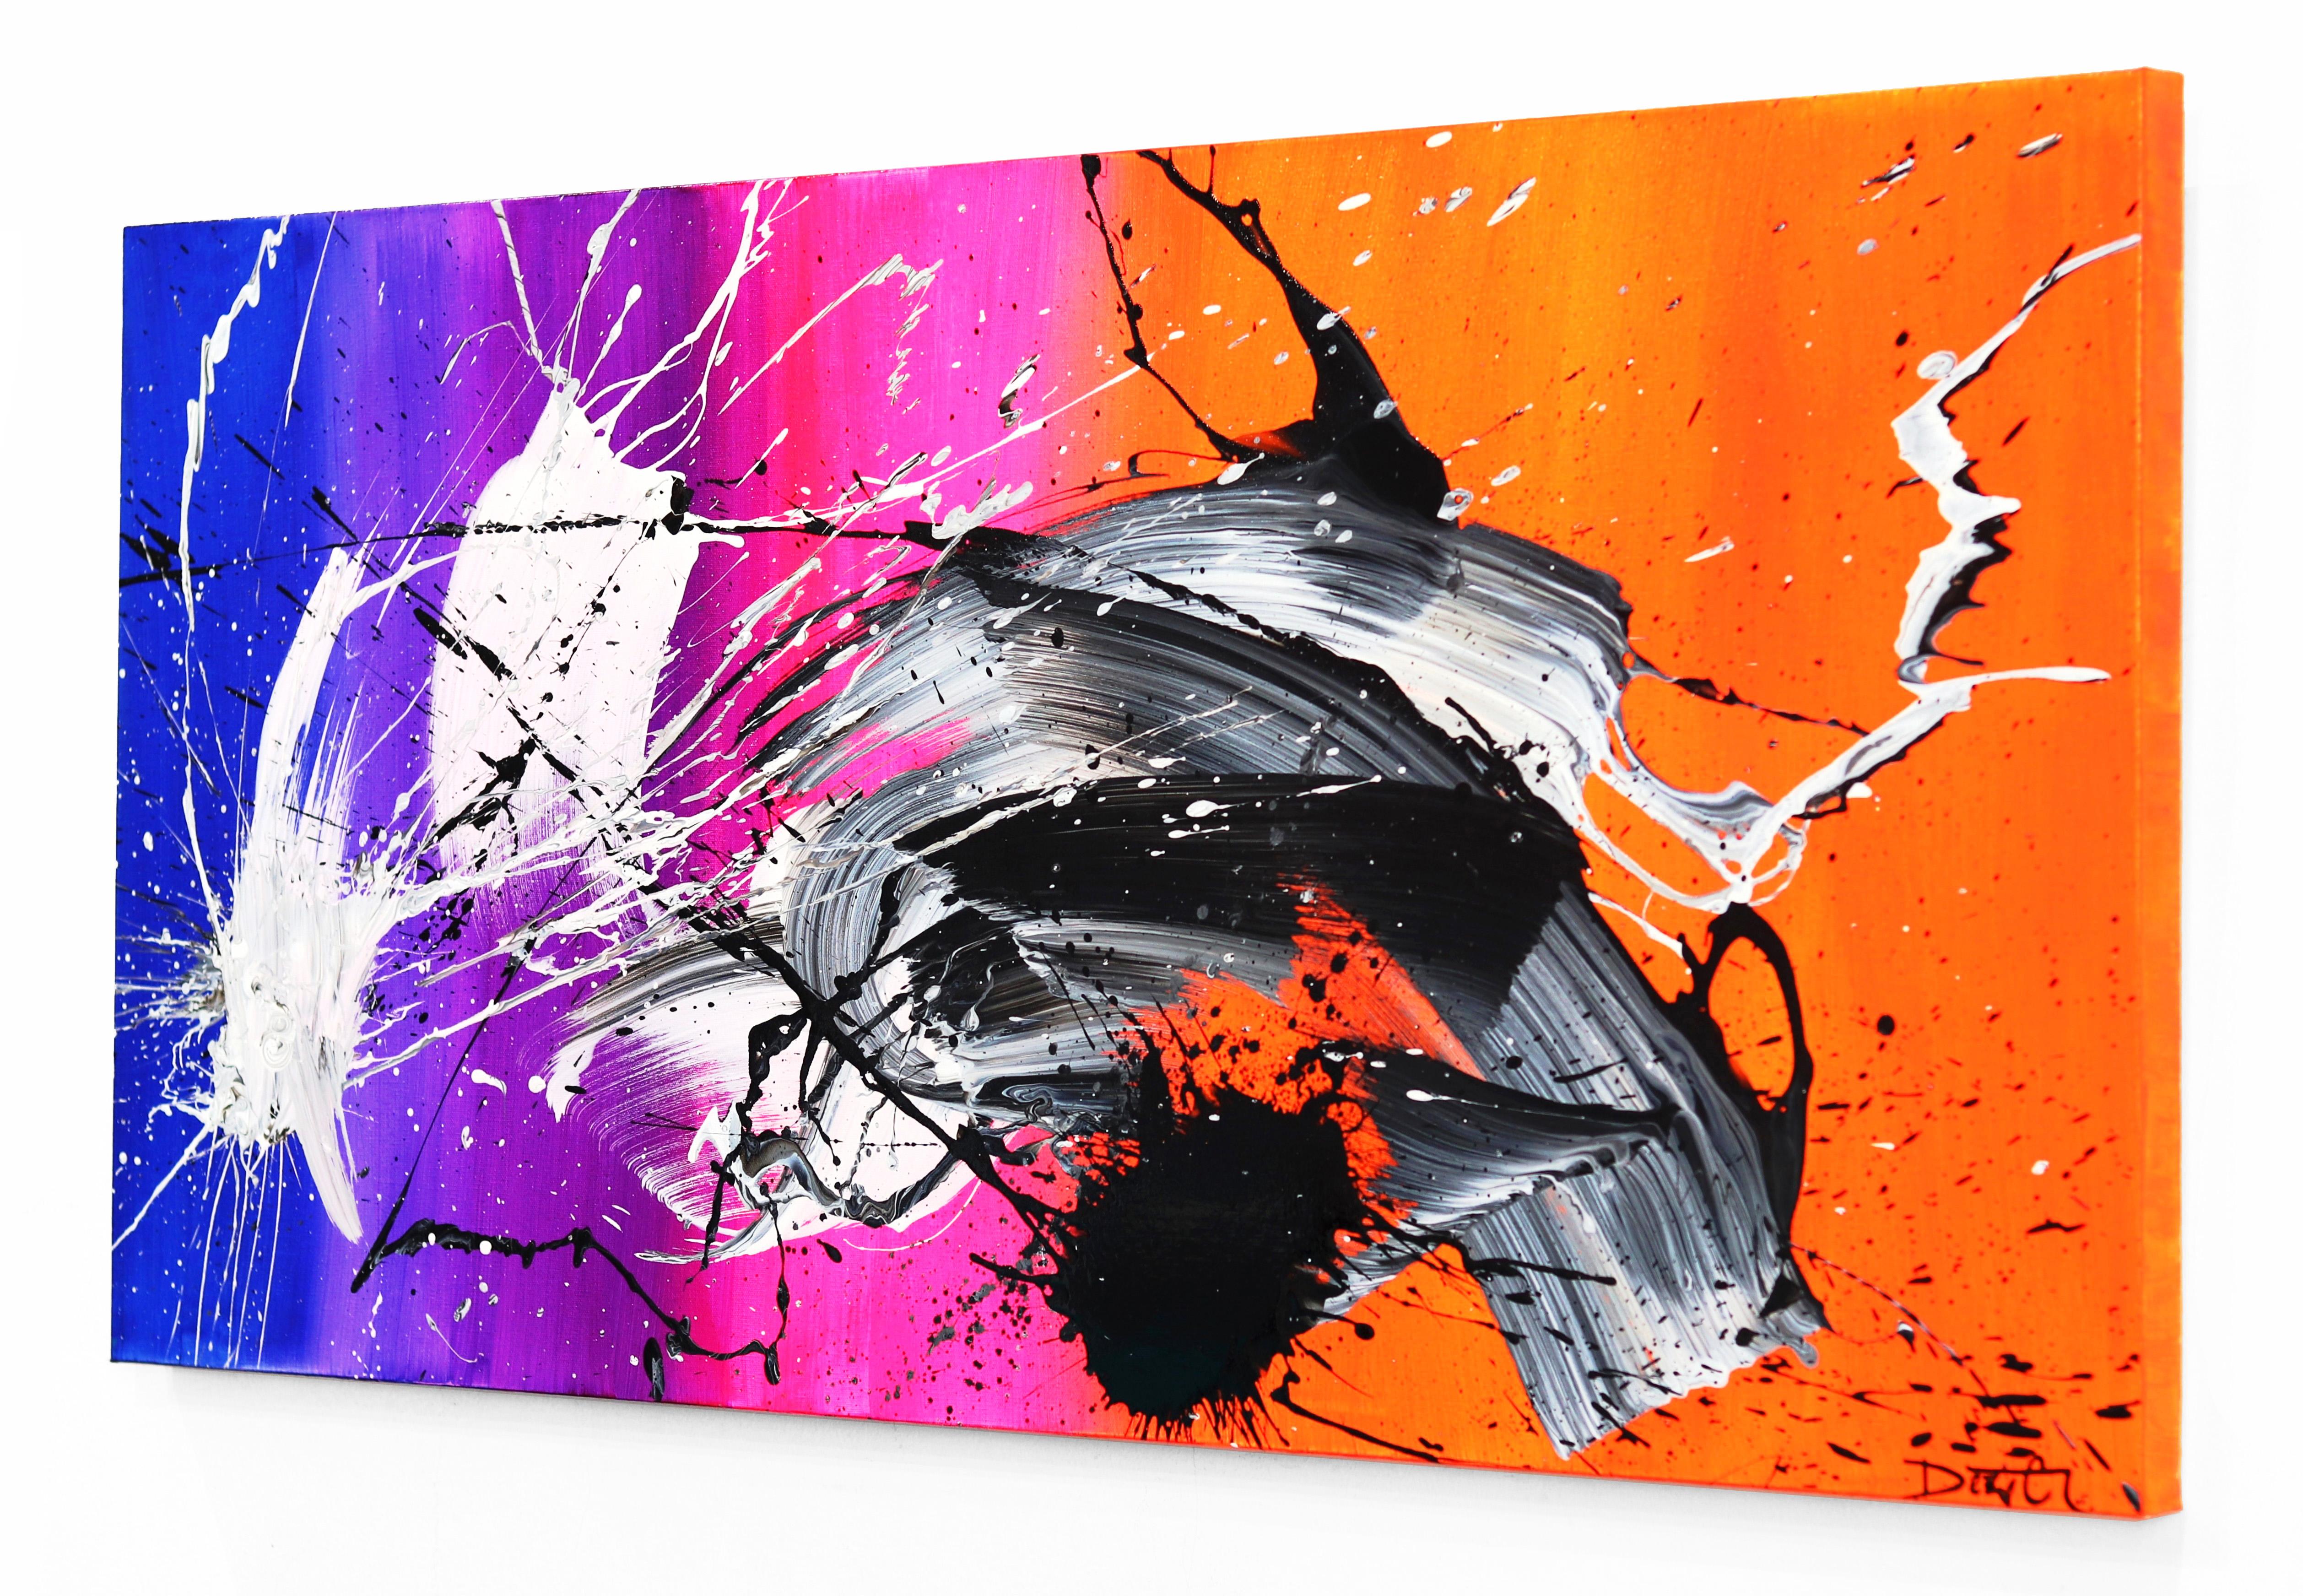 Quiet Storm - Vivid Abstract Expressionism Colorful Painting on Canvas For Sale 2